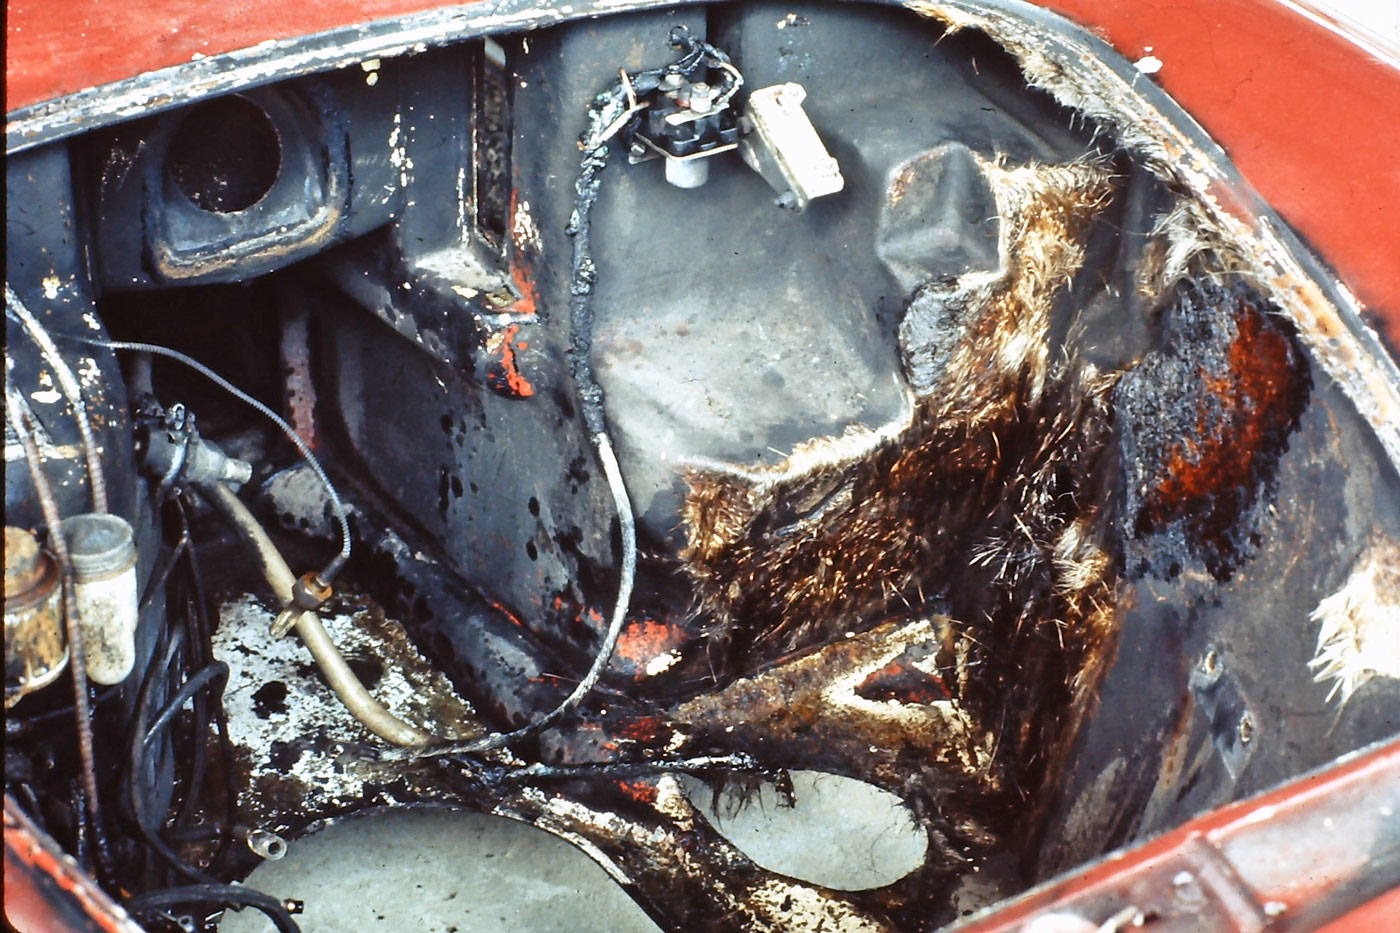 The Elite's Engine Bay, May 1973, Before the Restoration